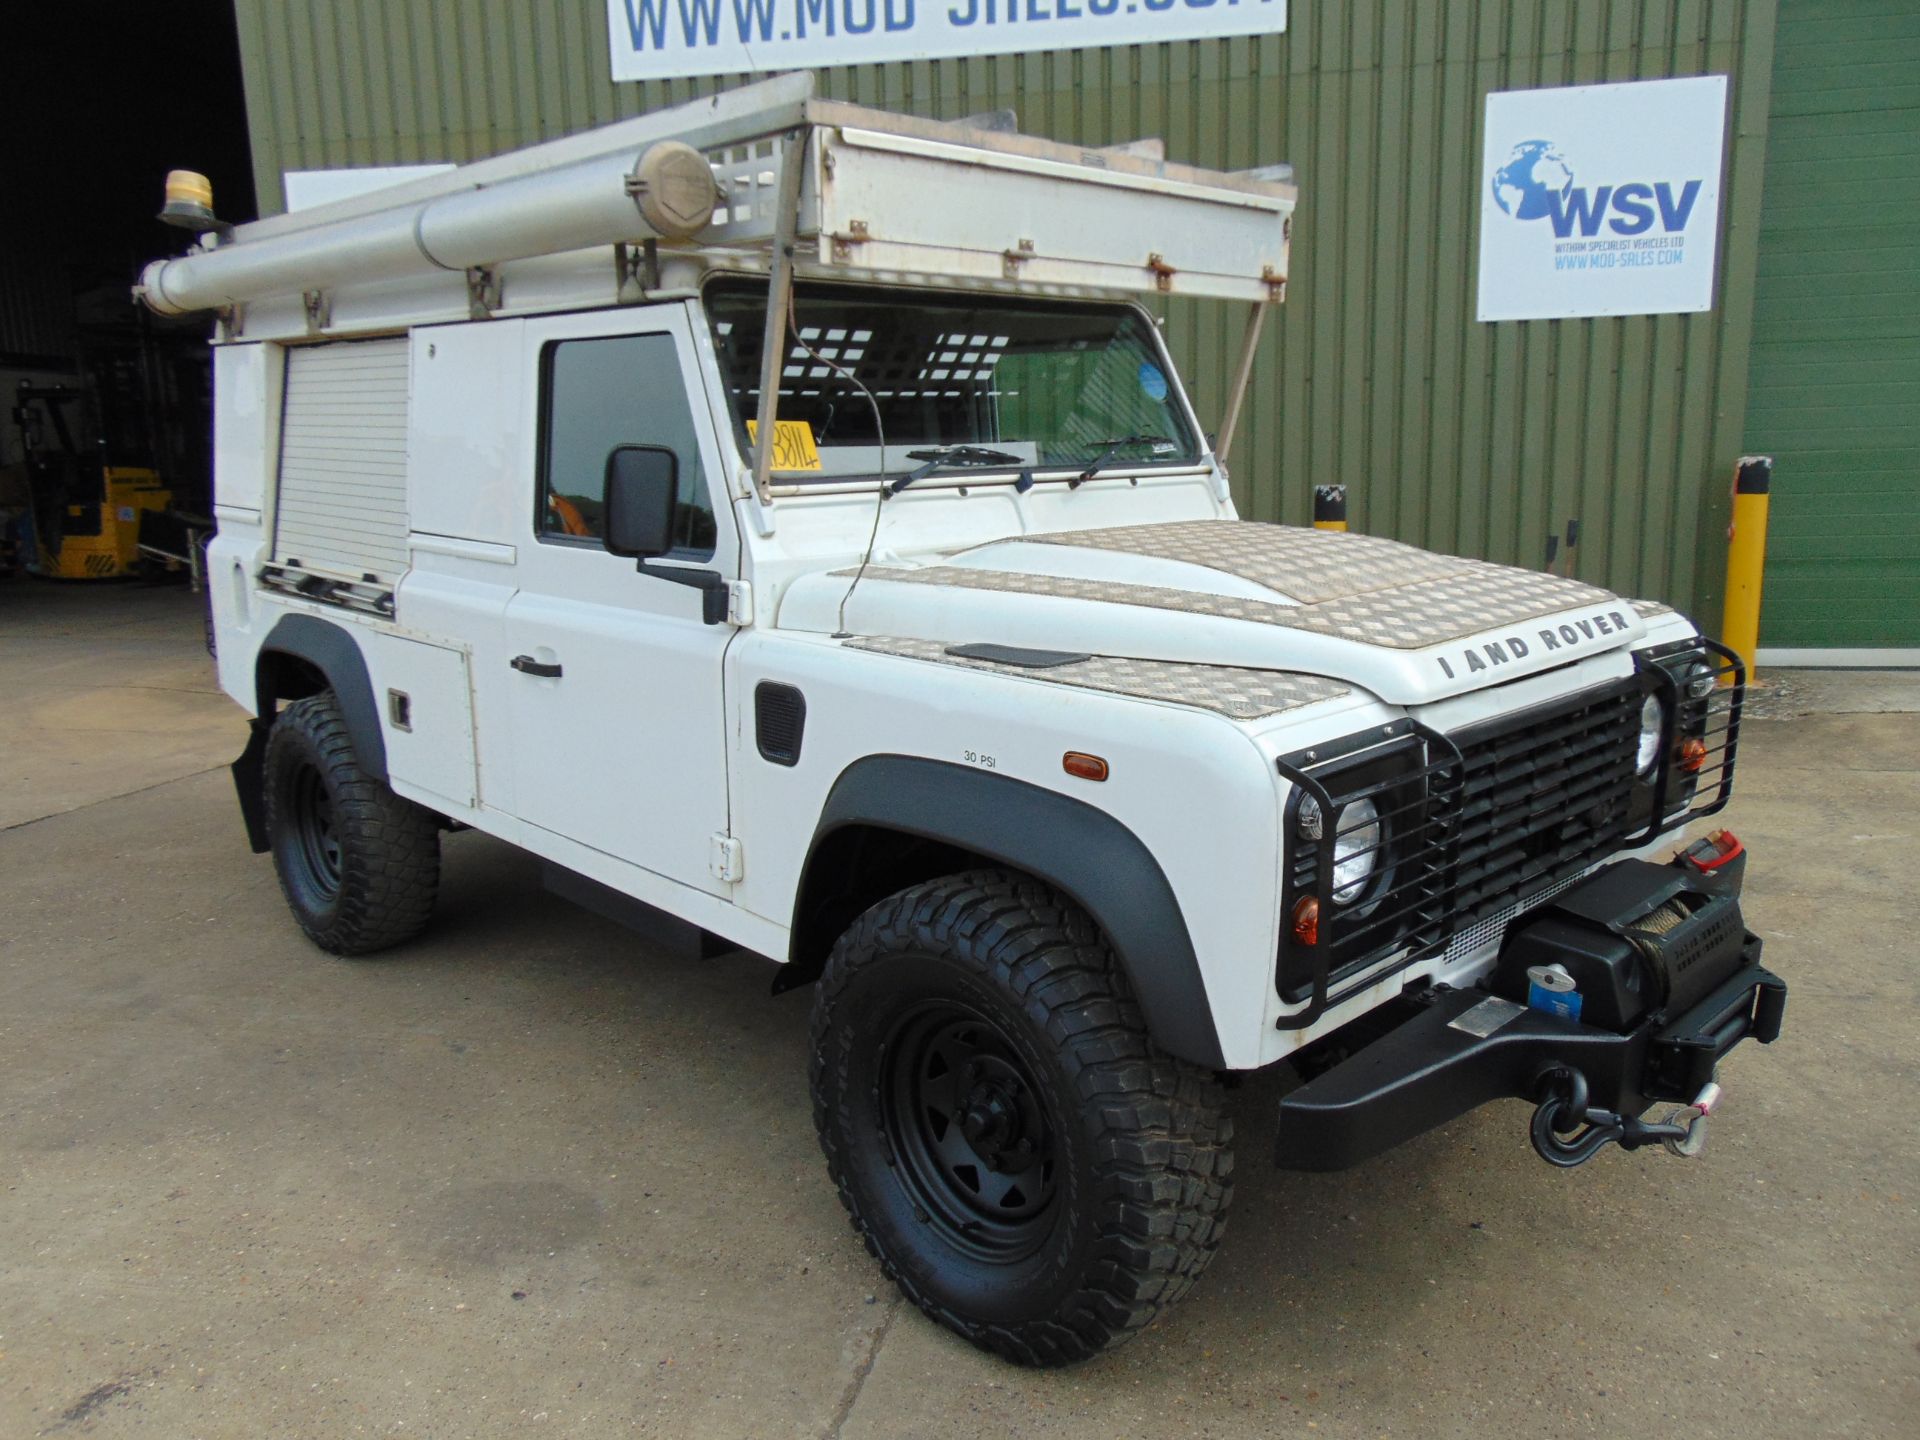 2013 Land Rover Defender 110 Puma hardtop 4x4 Utility vehicle (mobile workshop) with hydraulic winch - Image 2 of 44